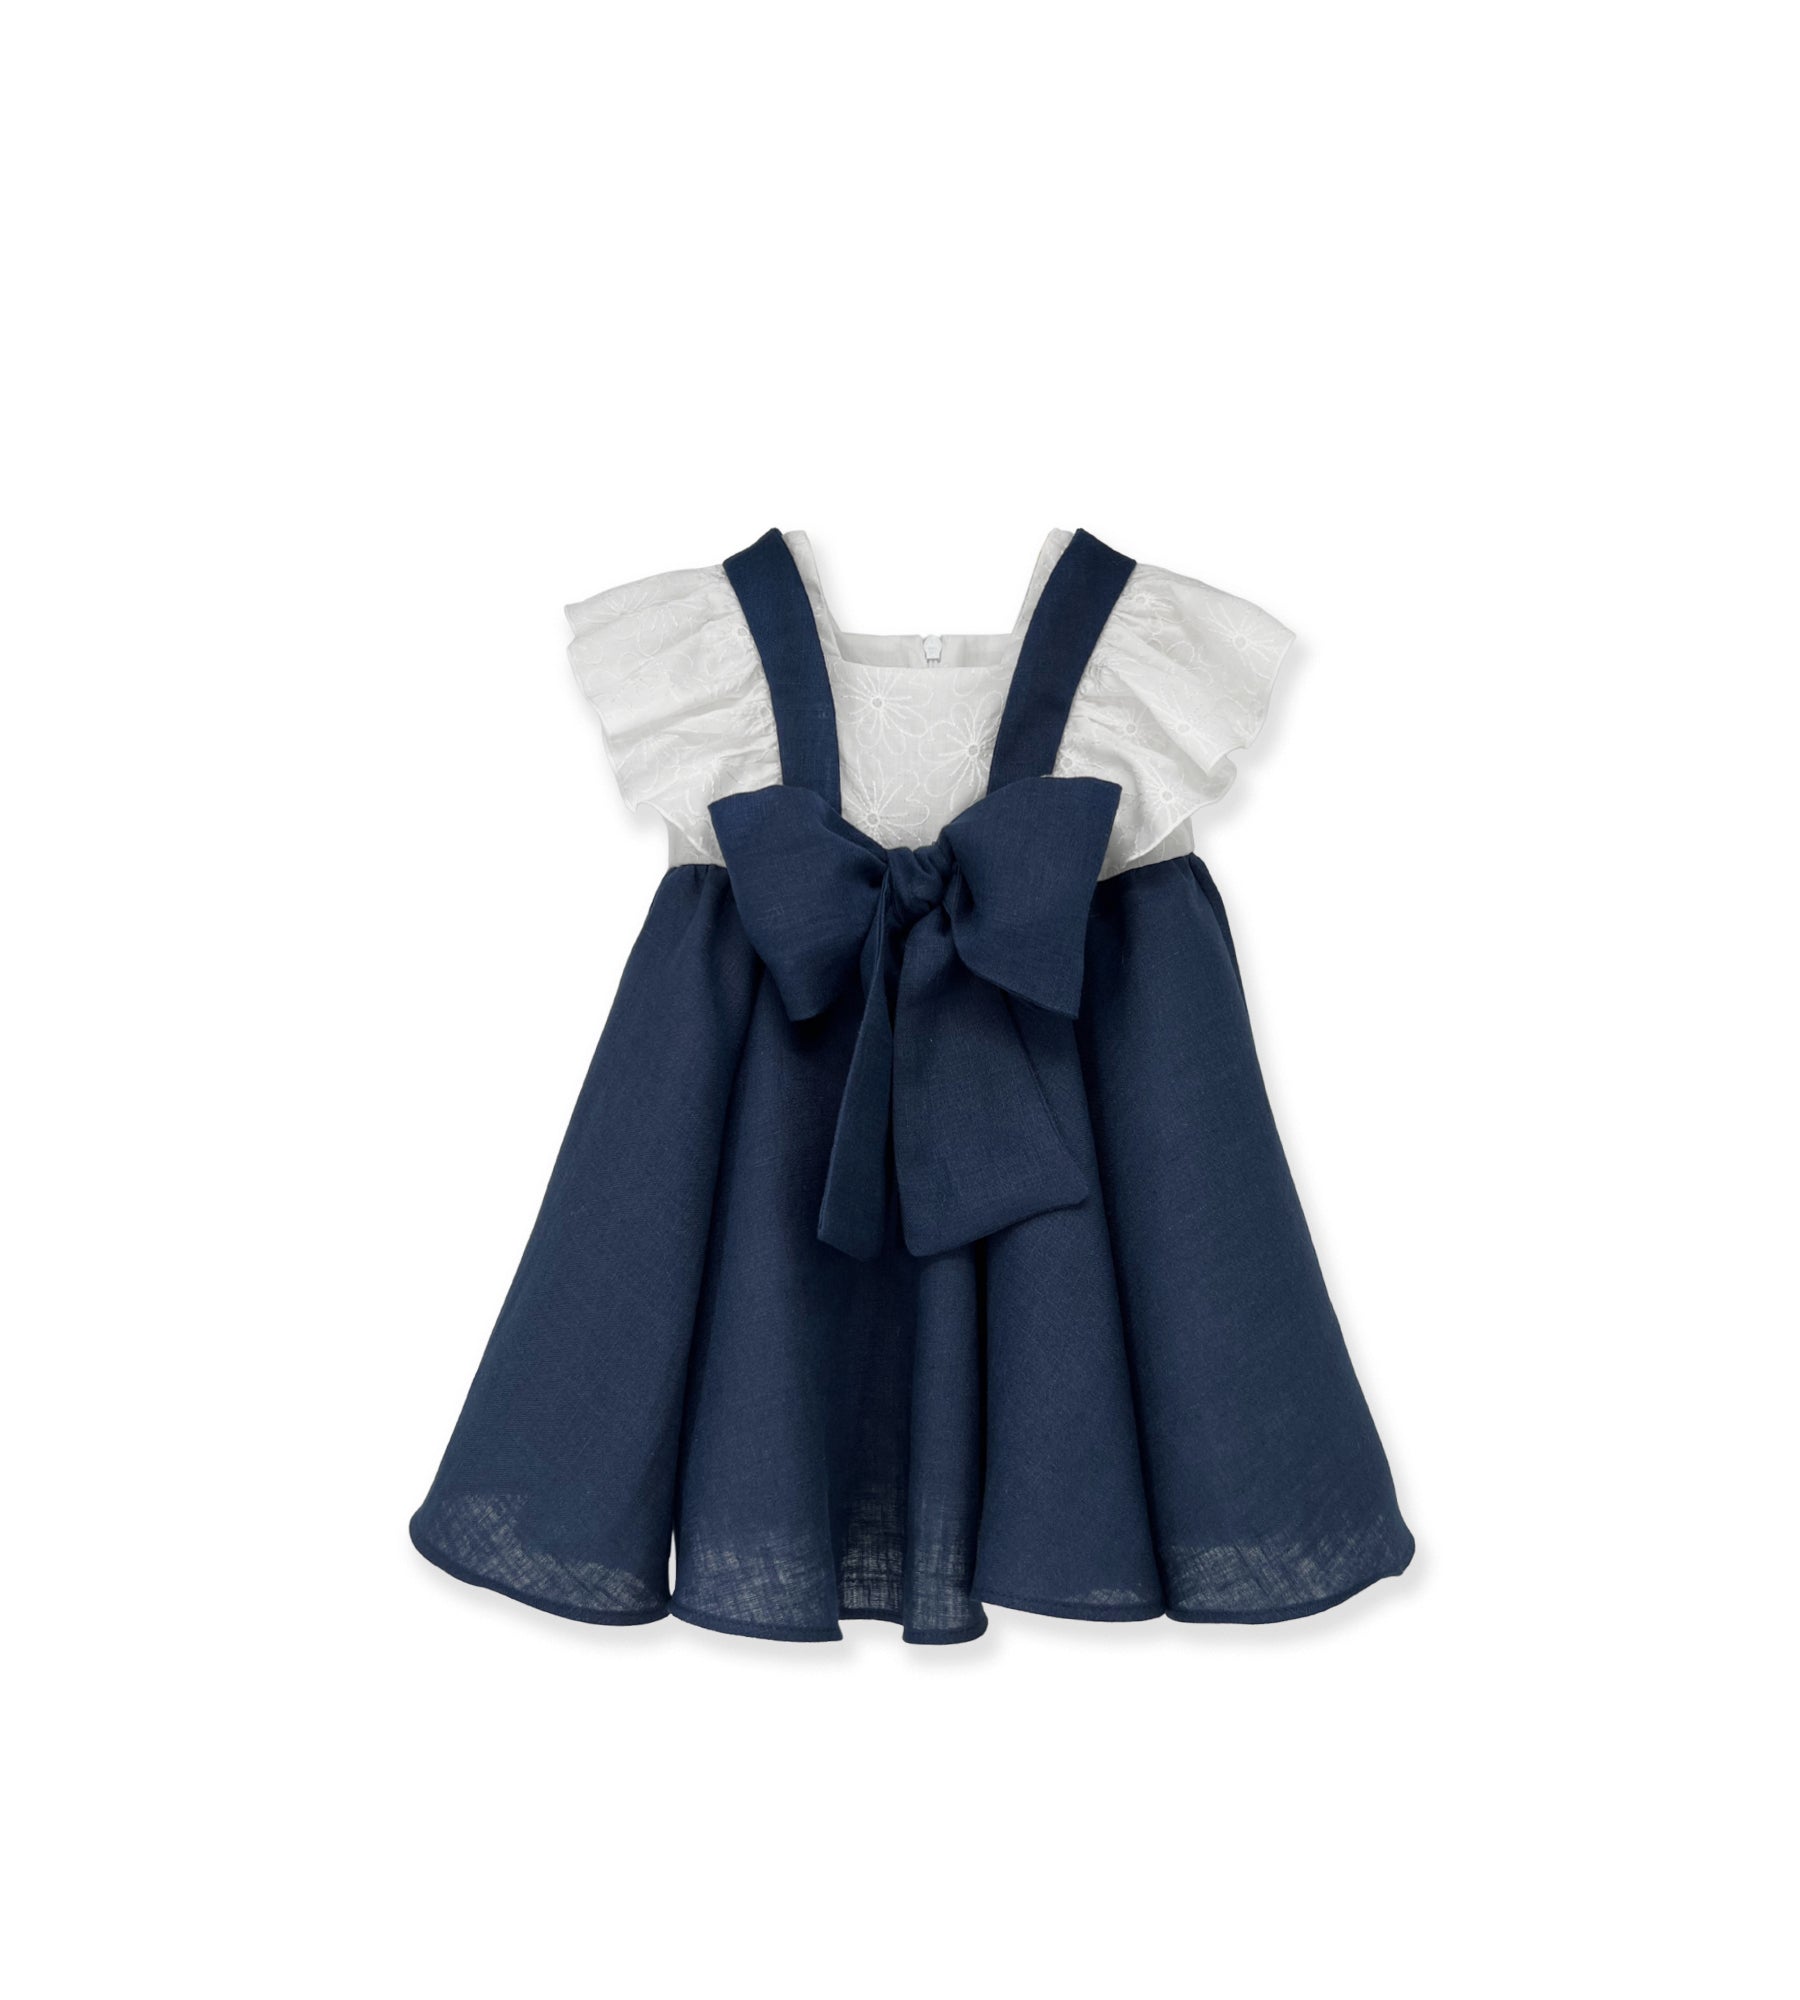 NAVY DRESS WITH BOW